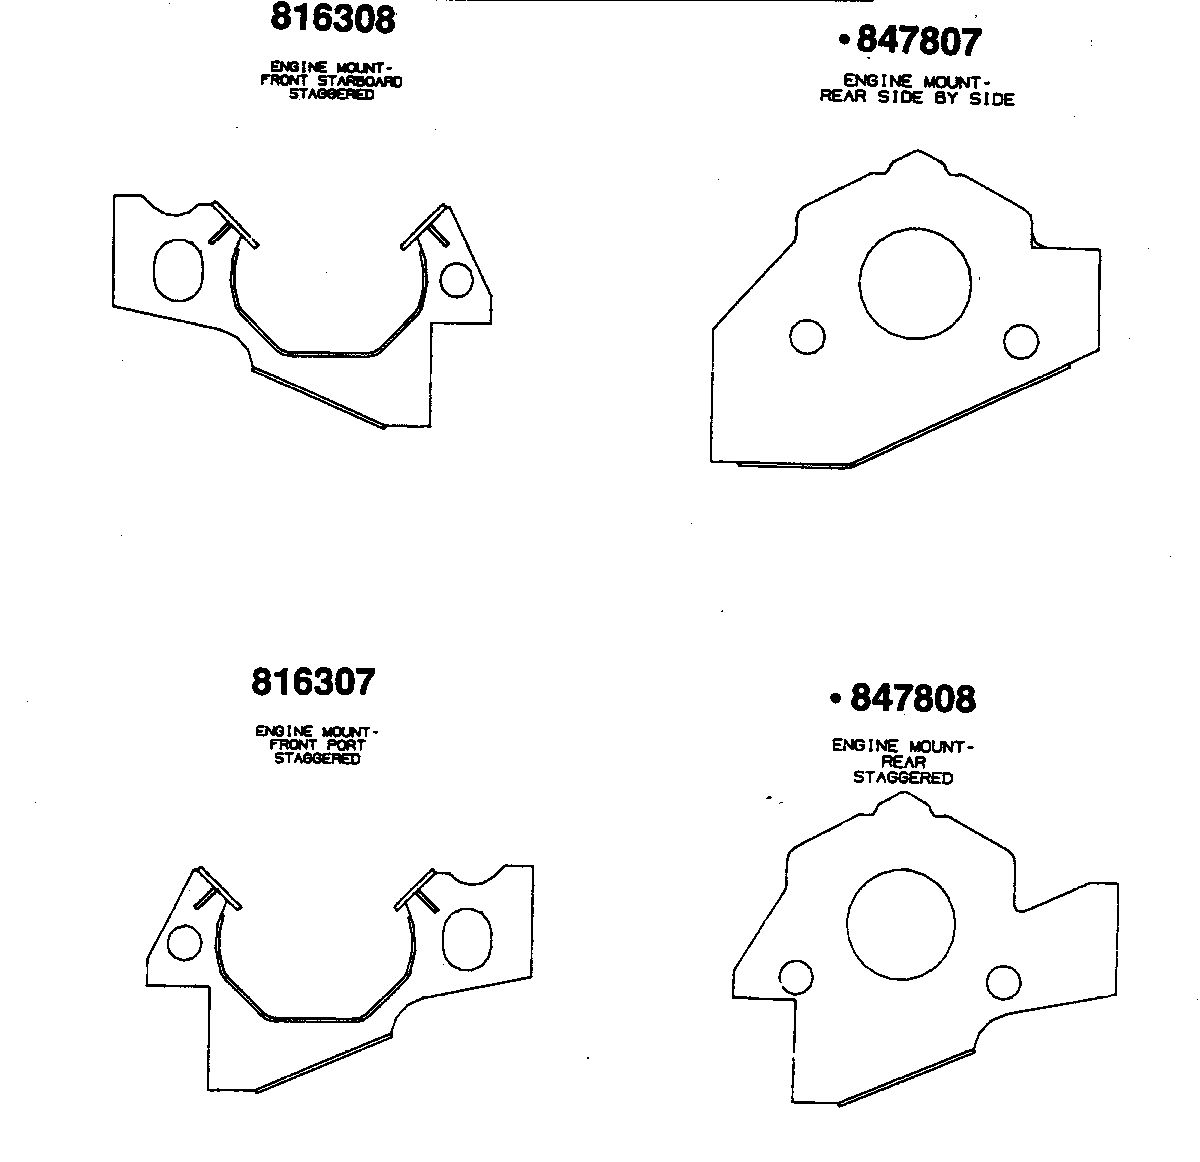 MERCRUISER 465 H.P. ENGINE MOUNT PLATES (STAGGERED)